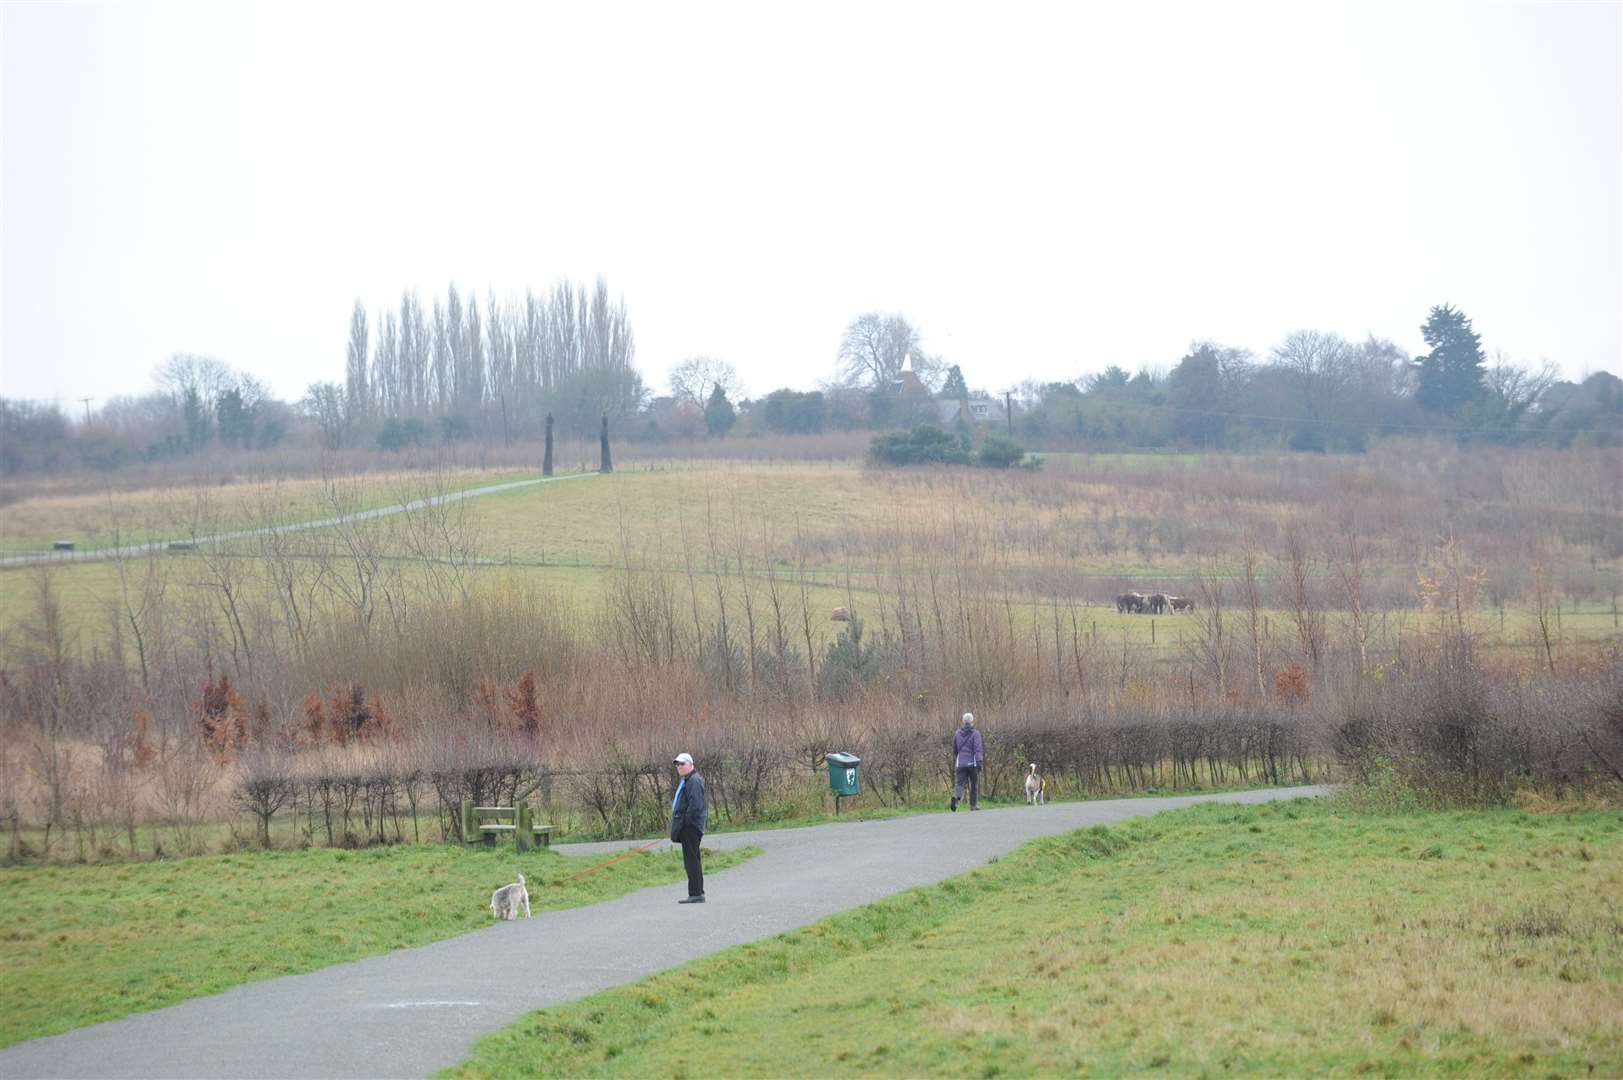 Jeskyns Community Woodland provides lots of open space for dog walkers and families